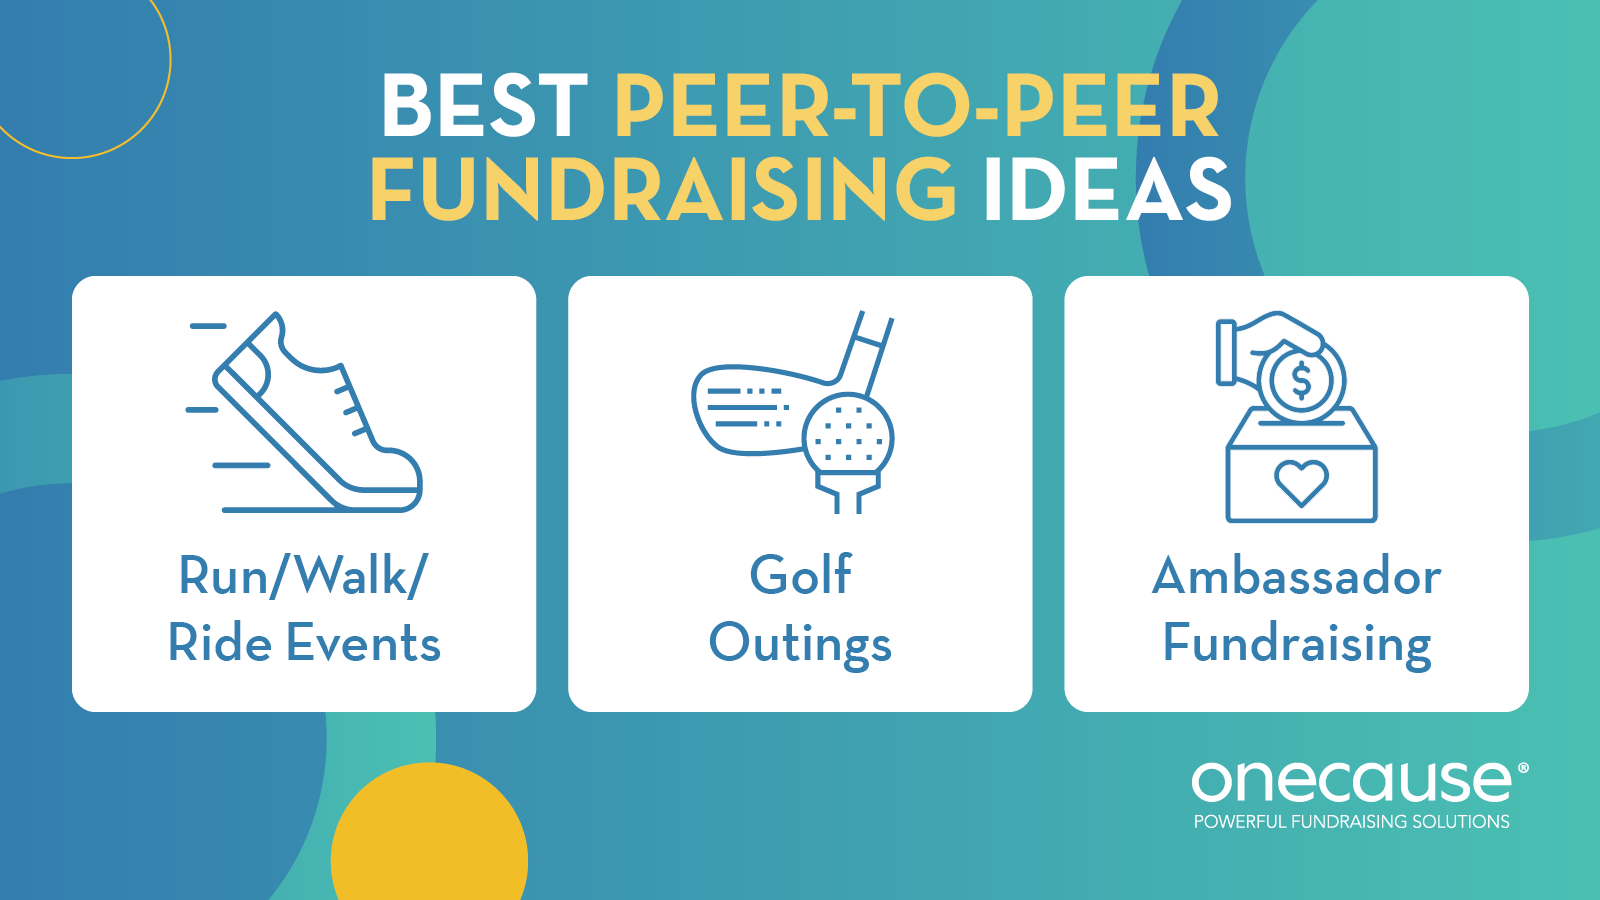 This image lists the best peer-to-peer fundraising ideas, also covered in the text below.